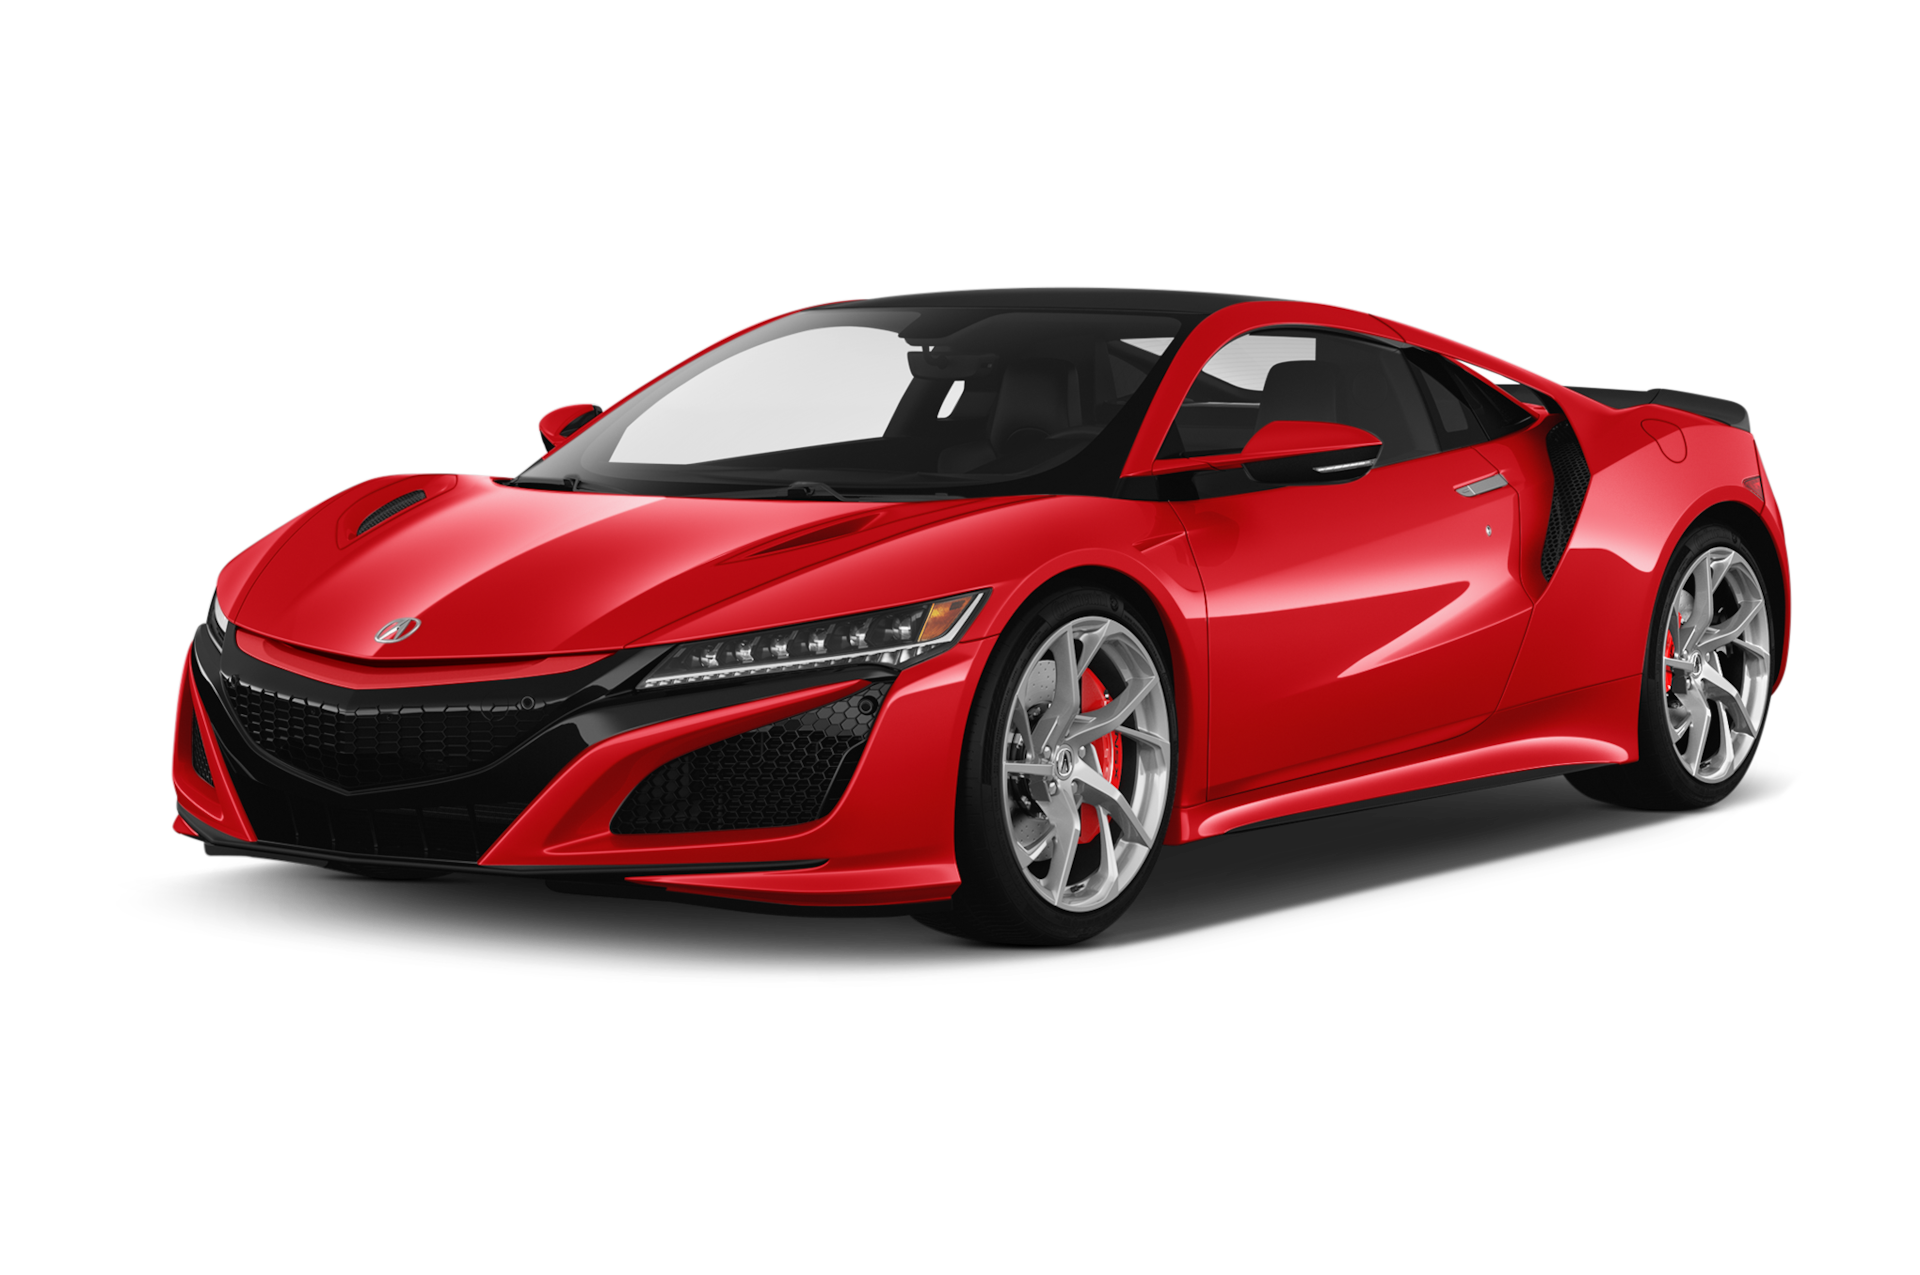 2019 Acura NSX Prices, Reviews, and Photos - MotorTrend